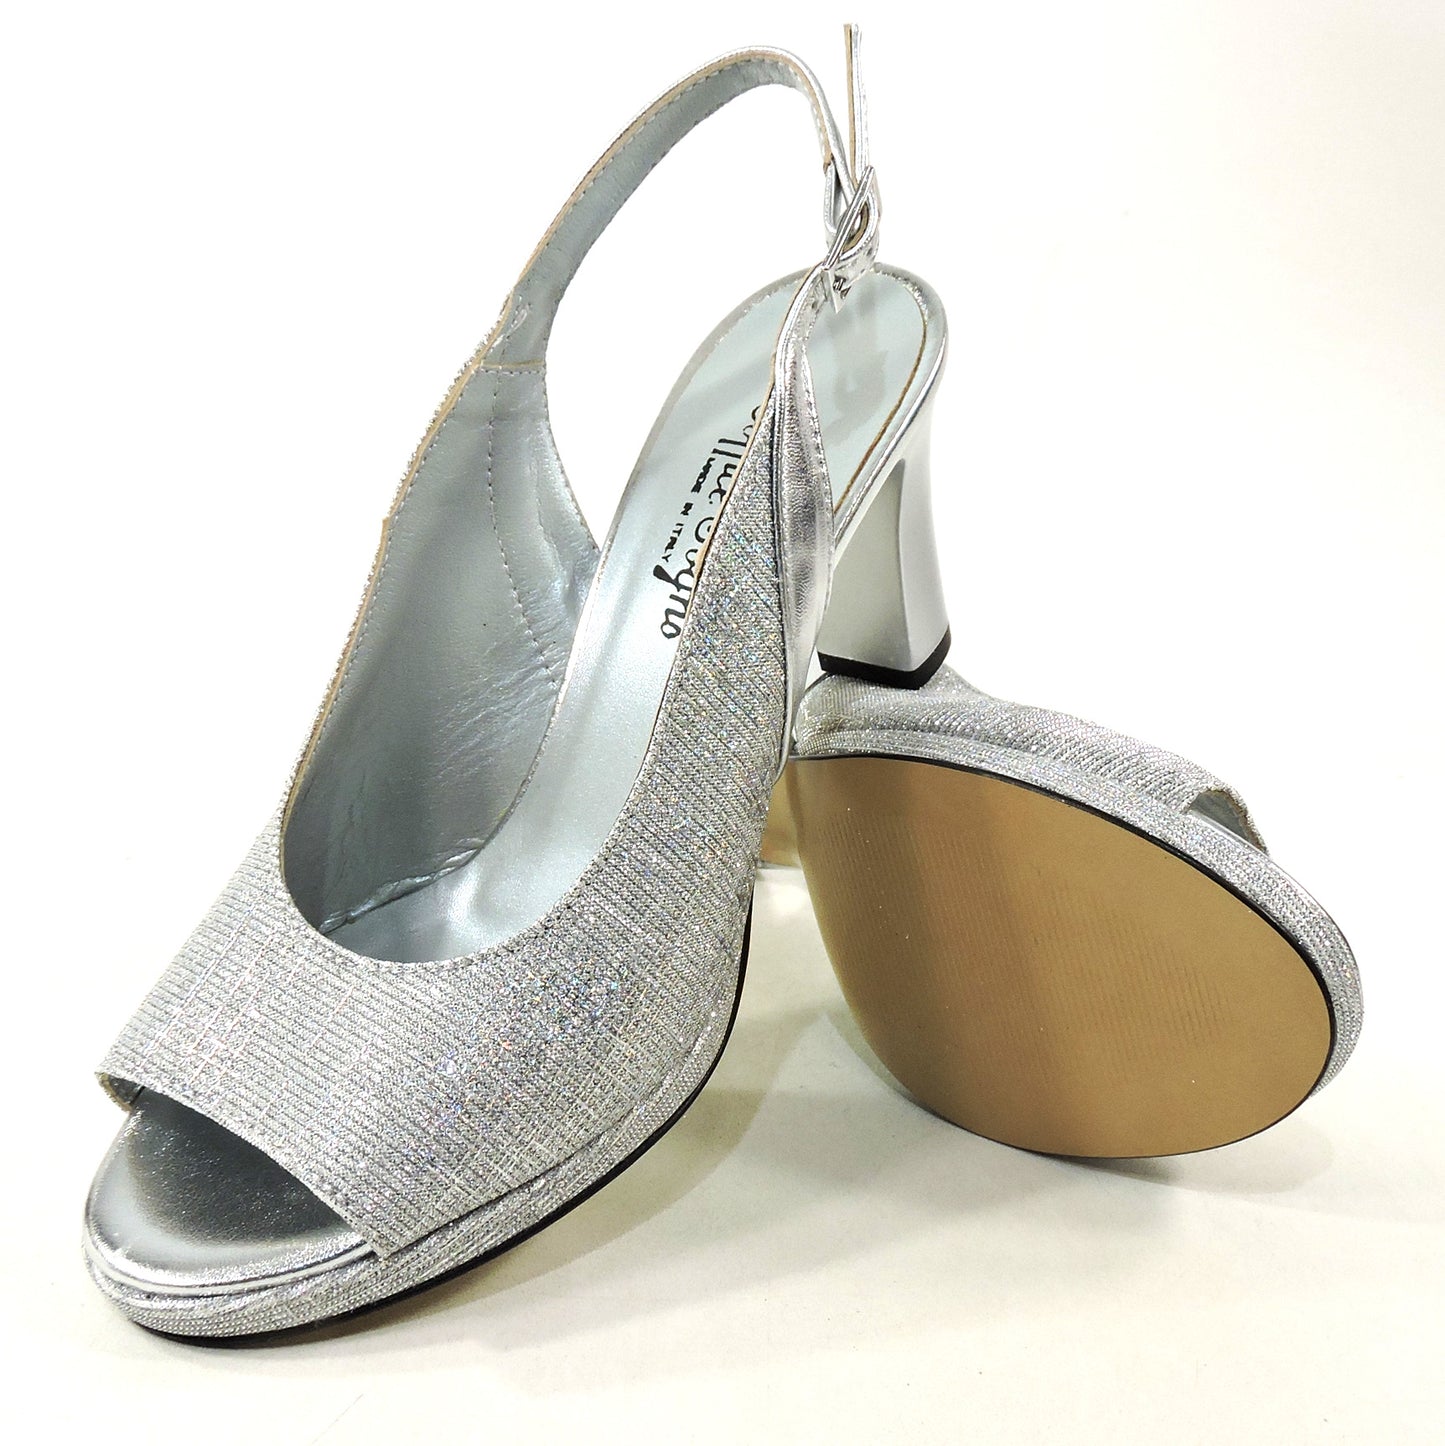 SOFFICE SOGNO 🇮🇹 WOMEN'S SILVER LEATHER COMFORT FASHION SANDALS